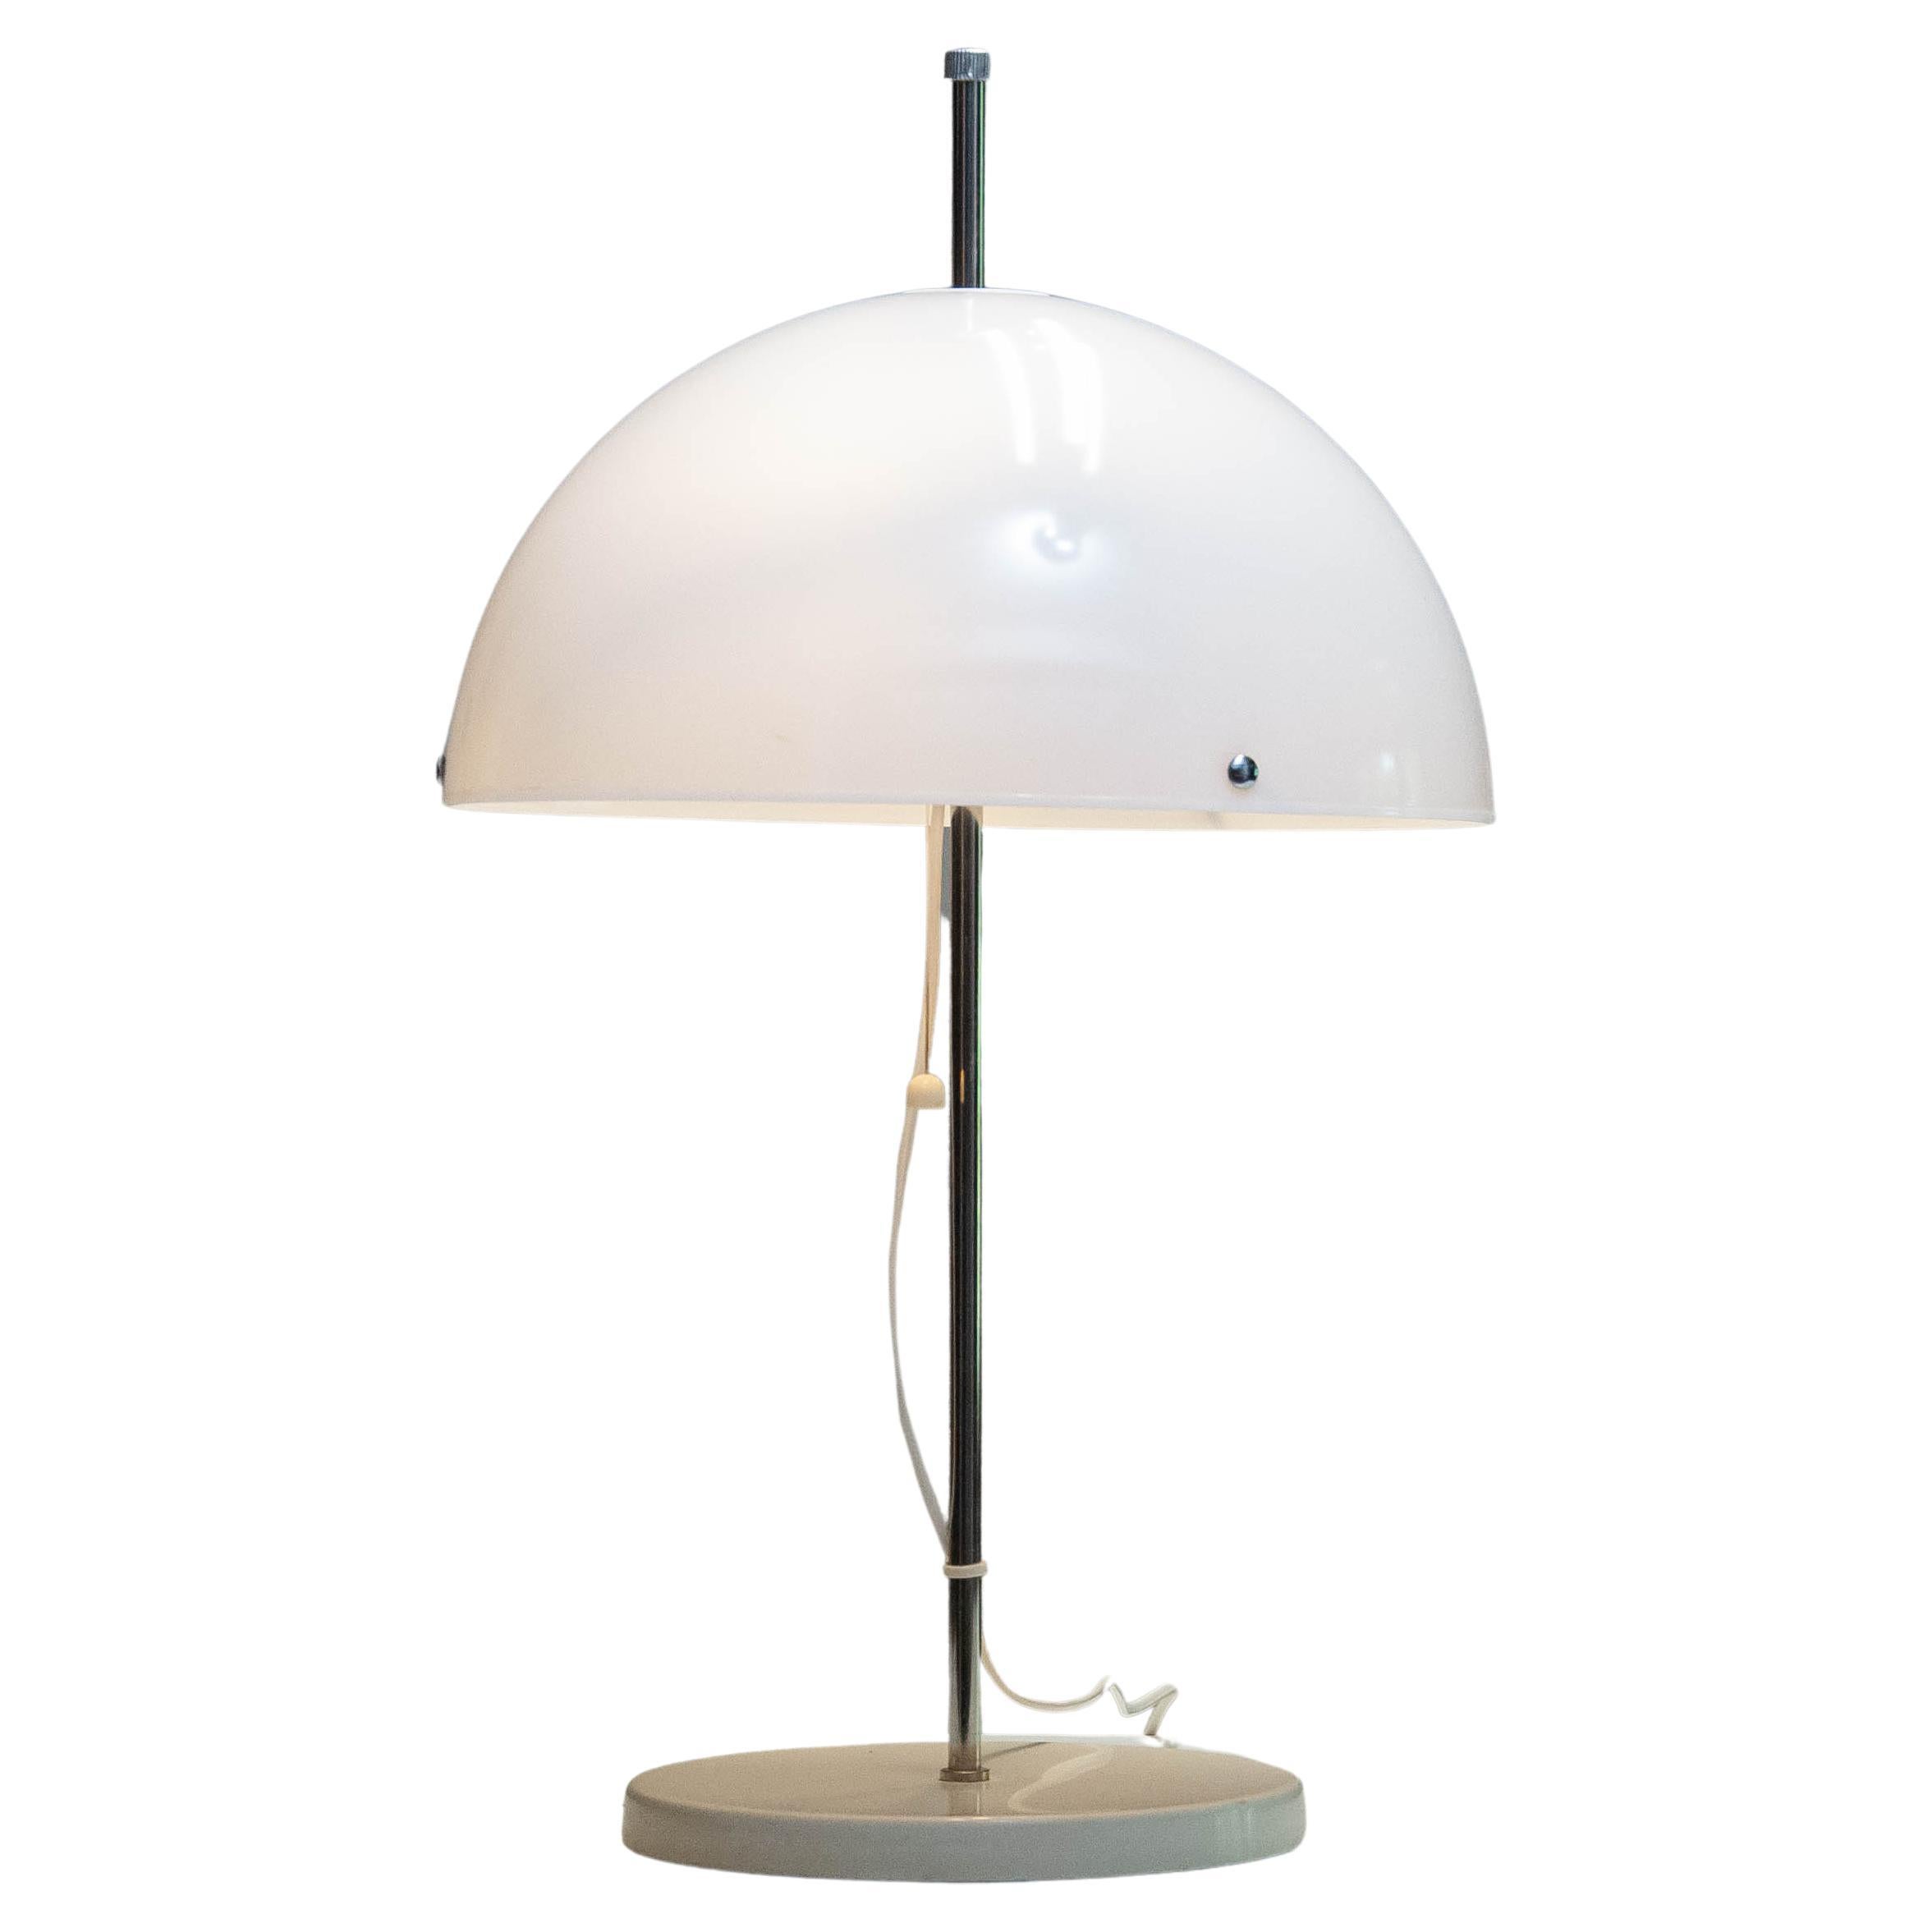 1970s Chrome and White Acrylic Mushroom Table Lamp Made by Fagerhult Sweden For Sale